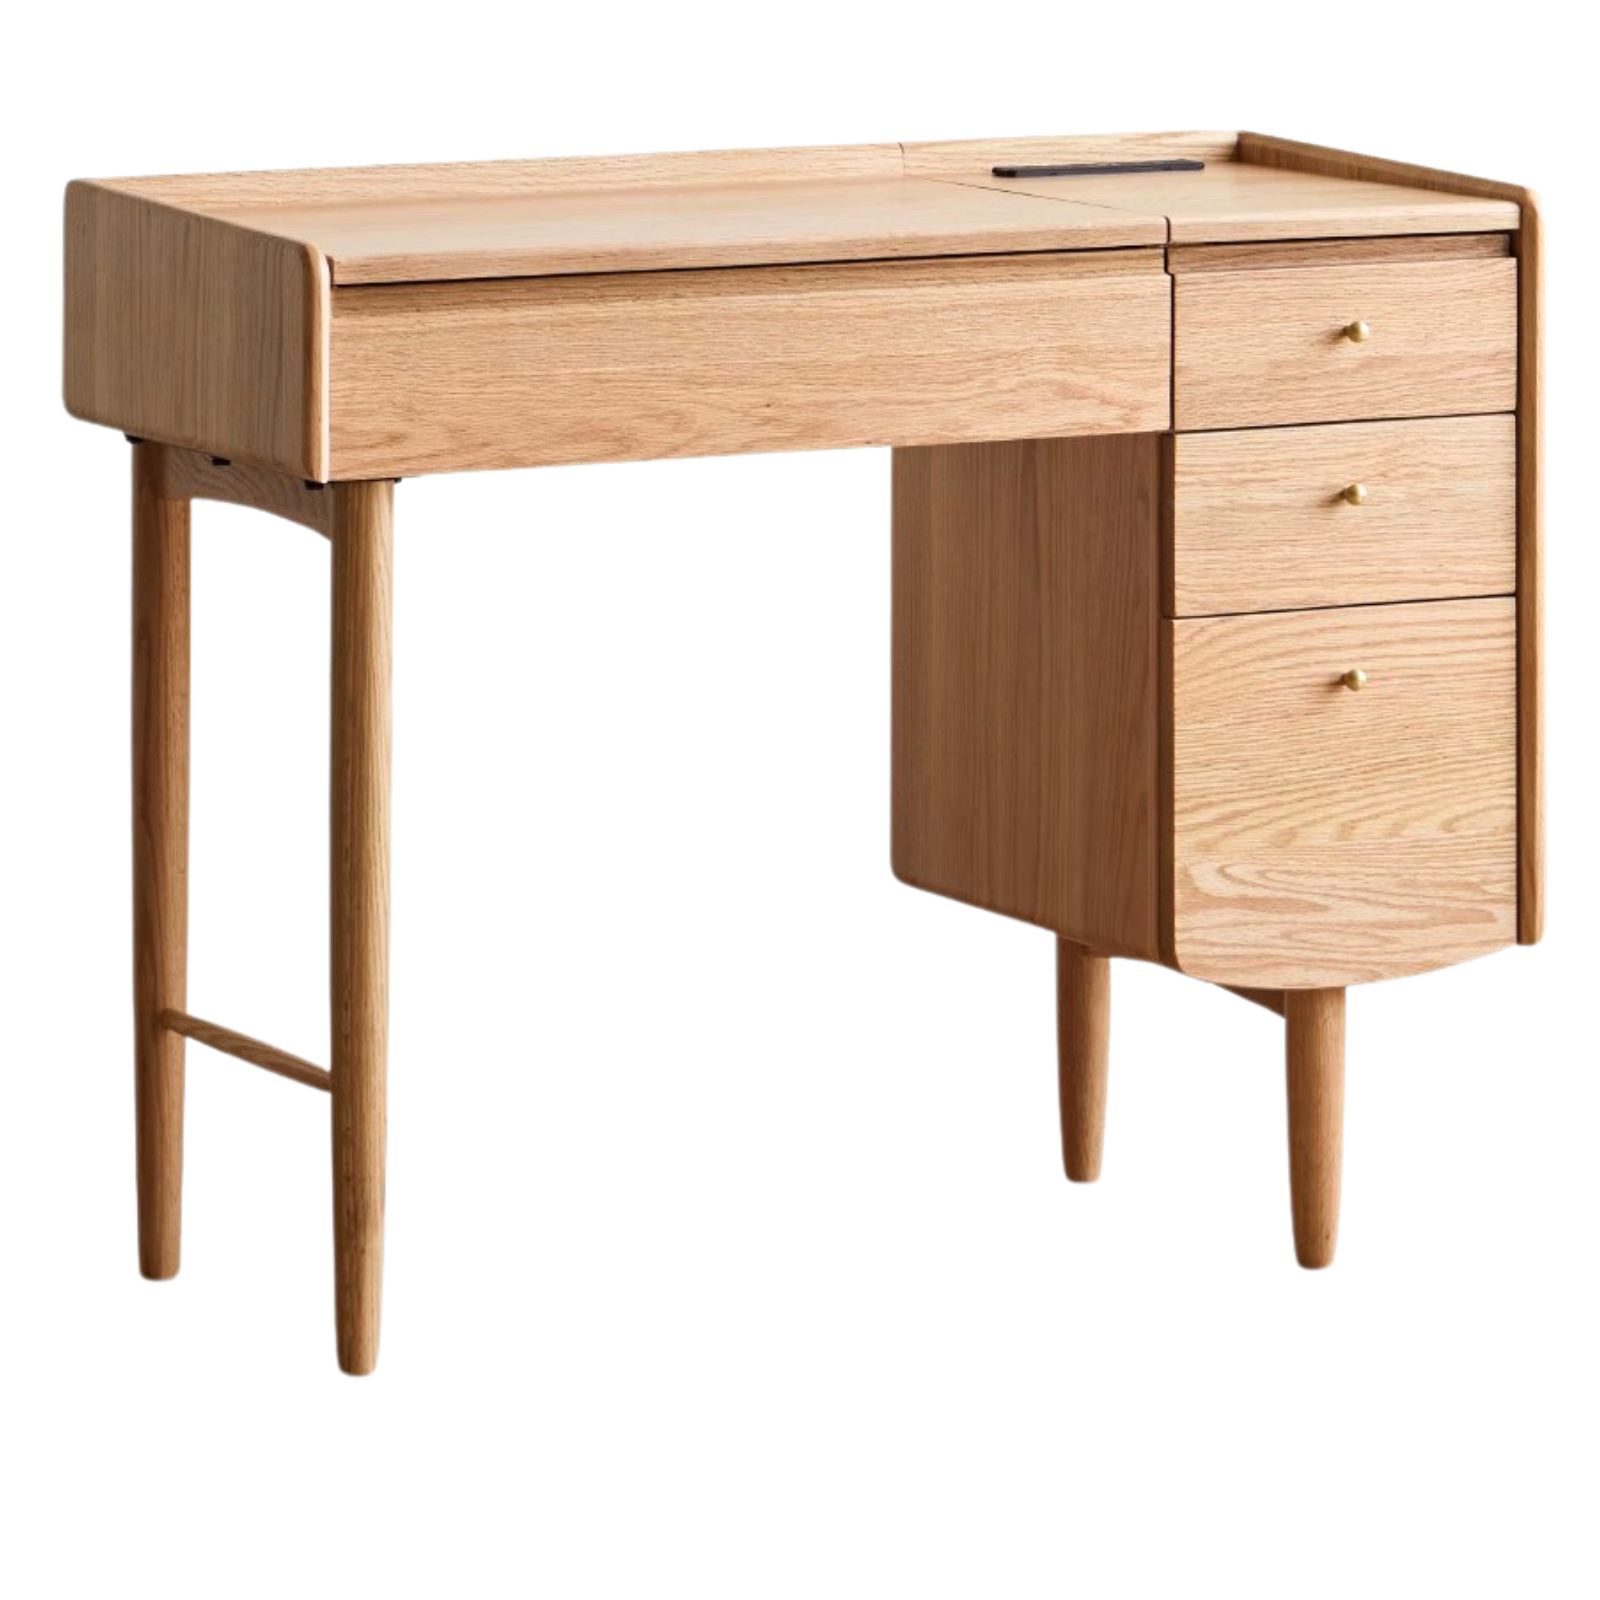 Oak Solid Wood Dressing Table with Light Mirror, Storage-